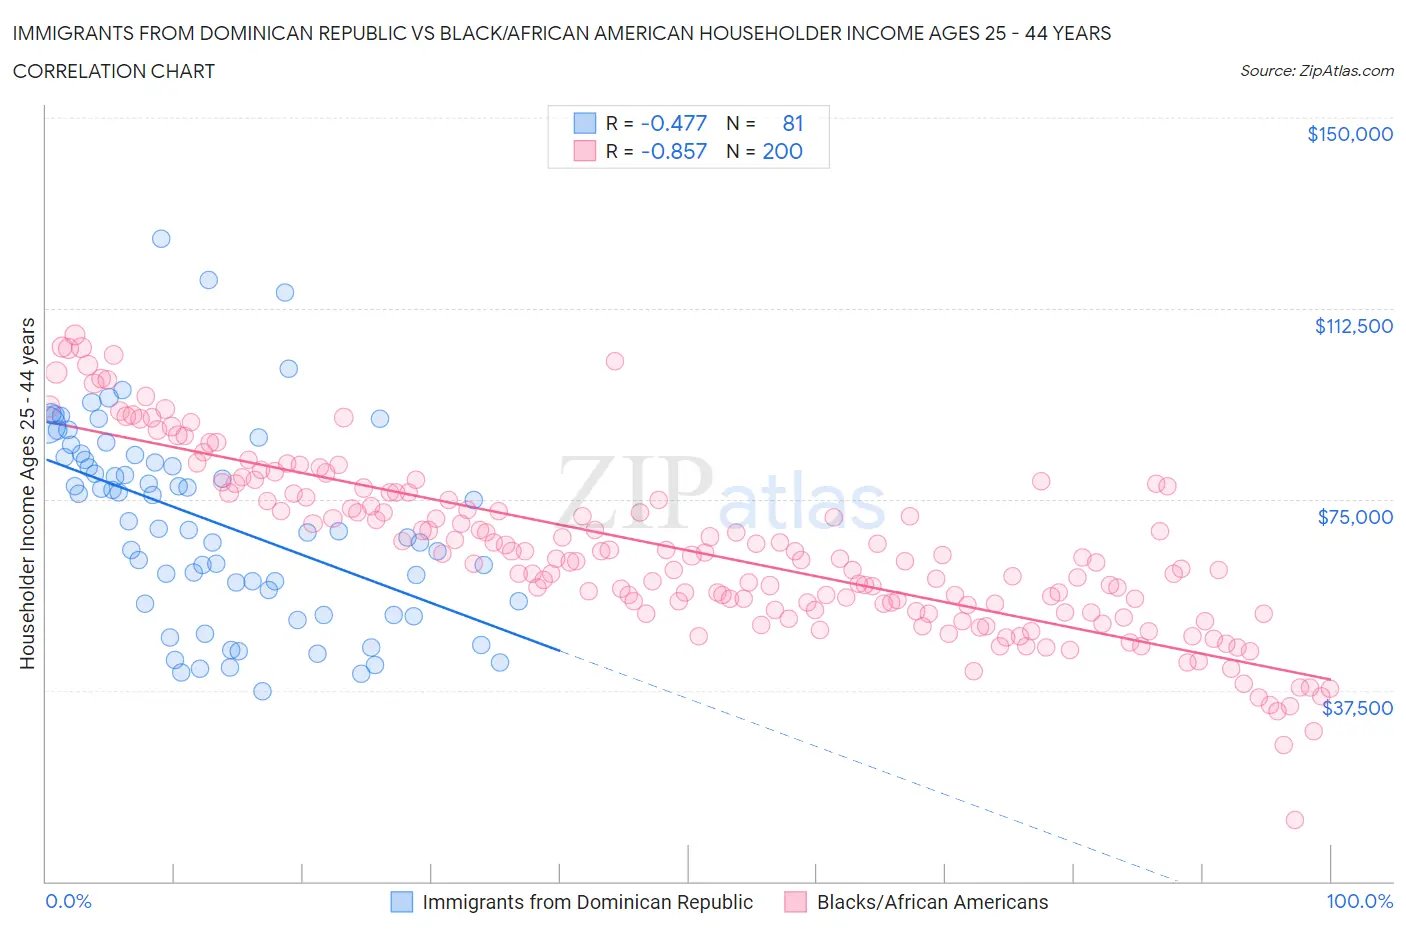 Immigrants from Dominican Republic vs Black/African American Householder Income Ages 25 - 44 years